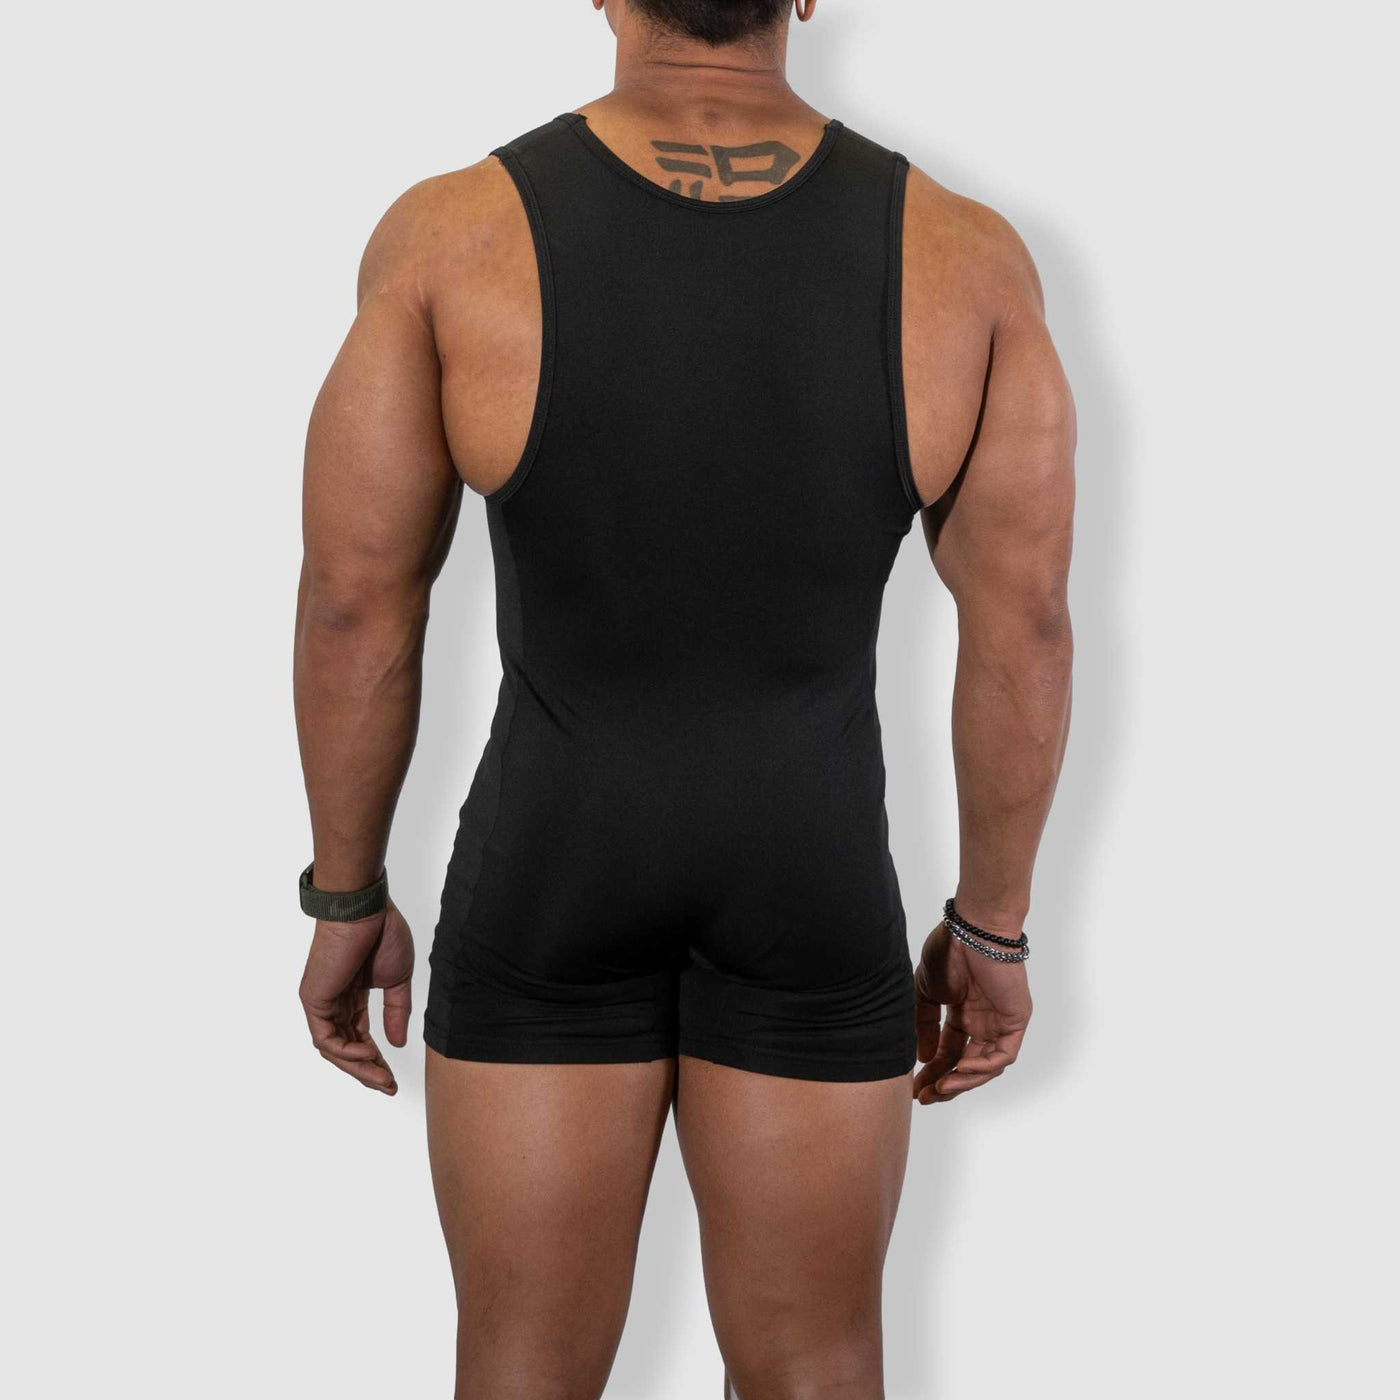 Strength Shop Powerlifting Singlet - UNBRANDED - IPF Approved - Strength Shop USA